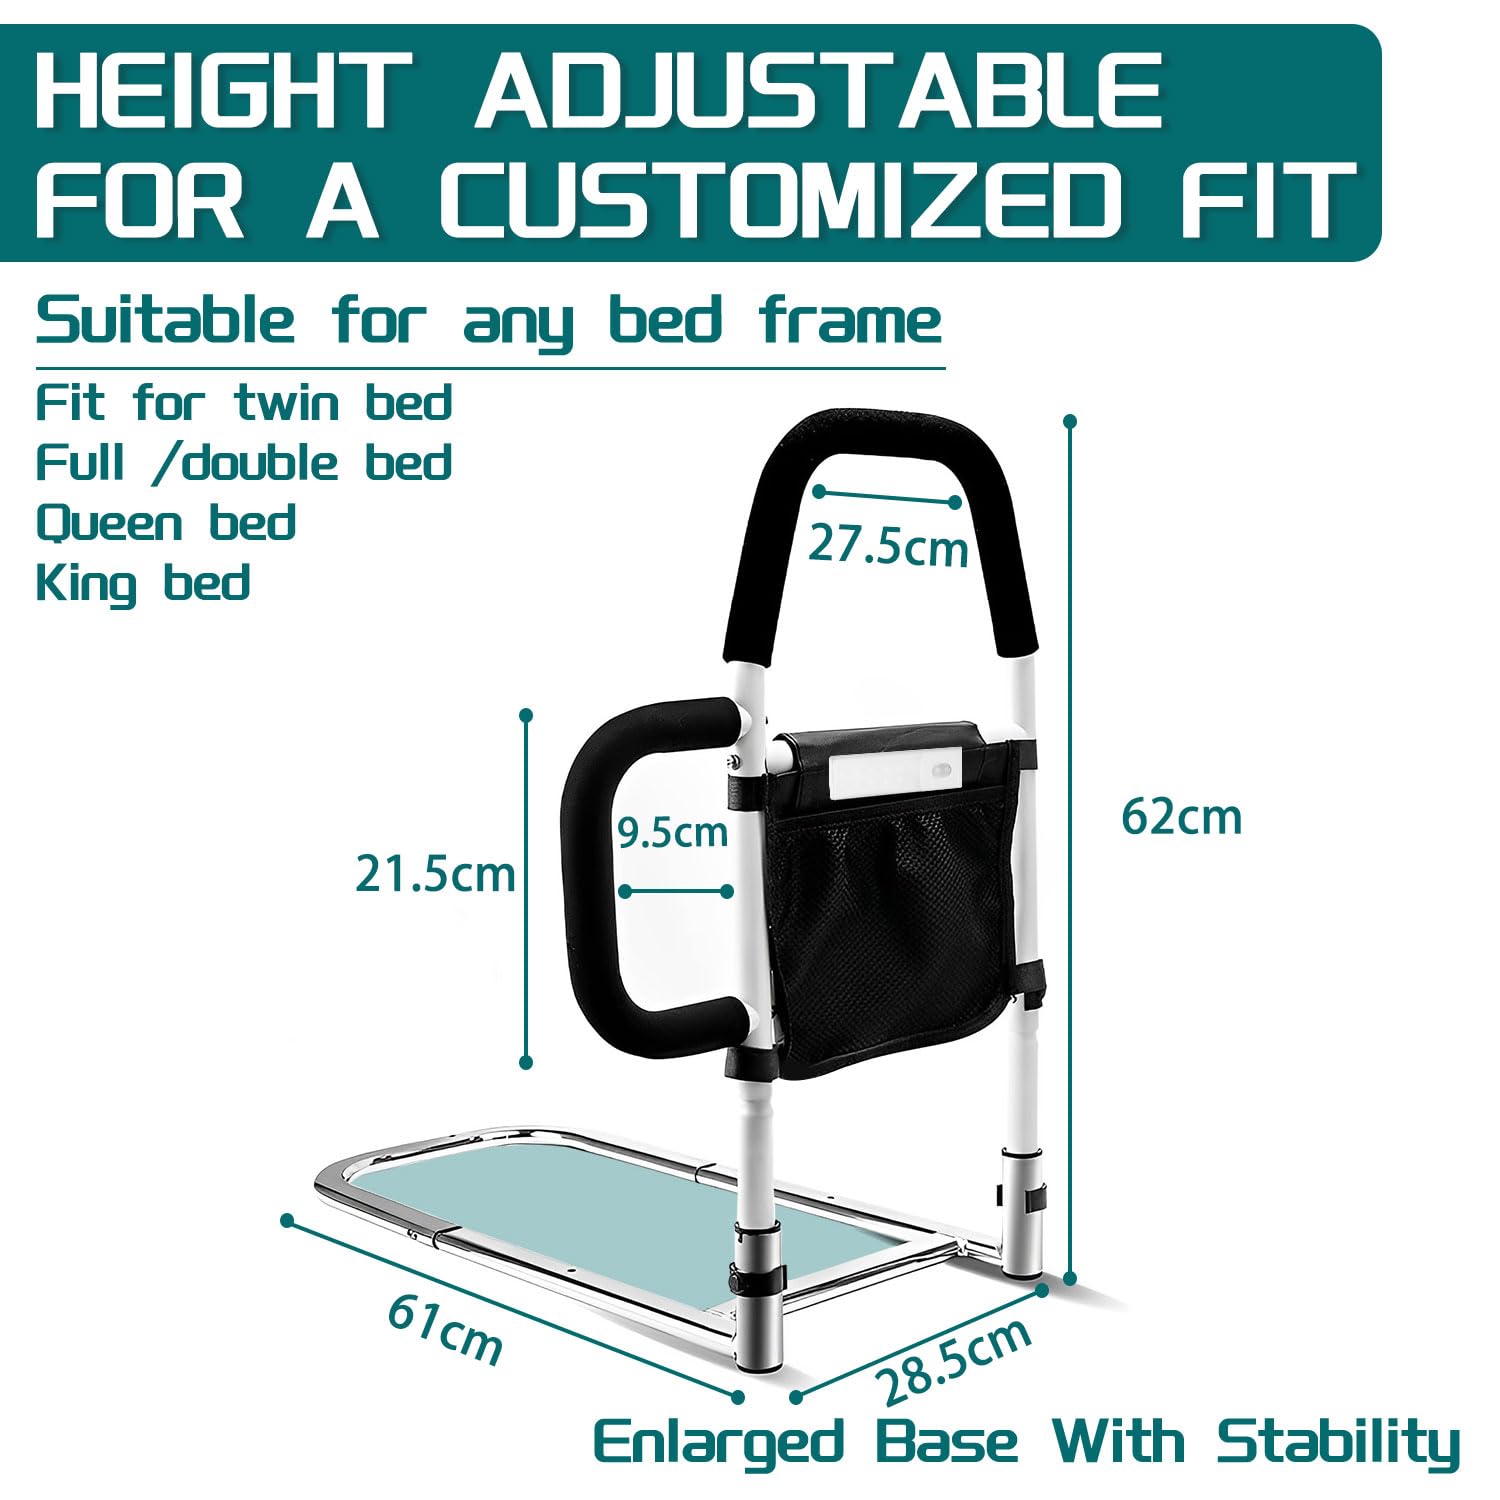 Bed Rails for Elderly Adults Safety-With Motion Light & Storage Pocket, Bed Safety Rails for Seniors, Bed Assist Bar for Seniors, Bed Cane for Seniors Fit Any Bed, Make Getting in & Out of Bed Easier